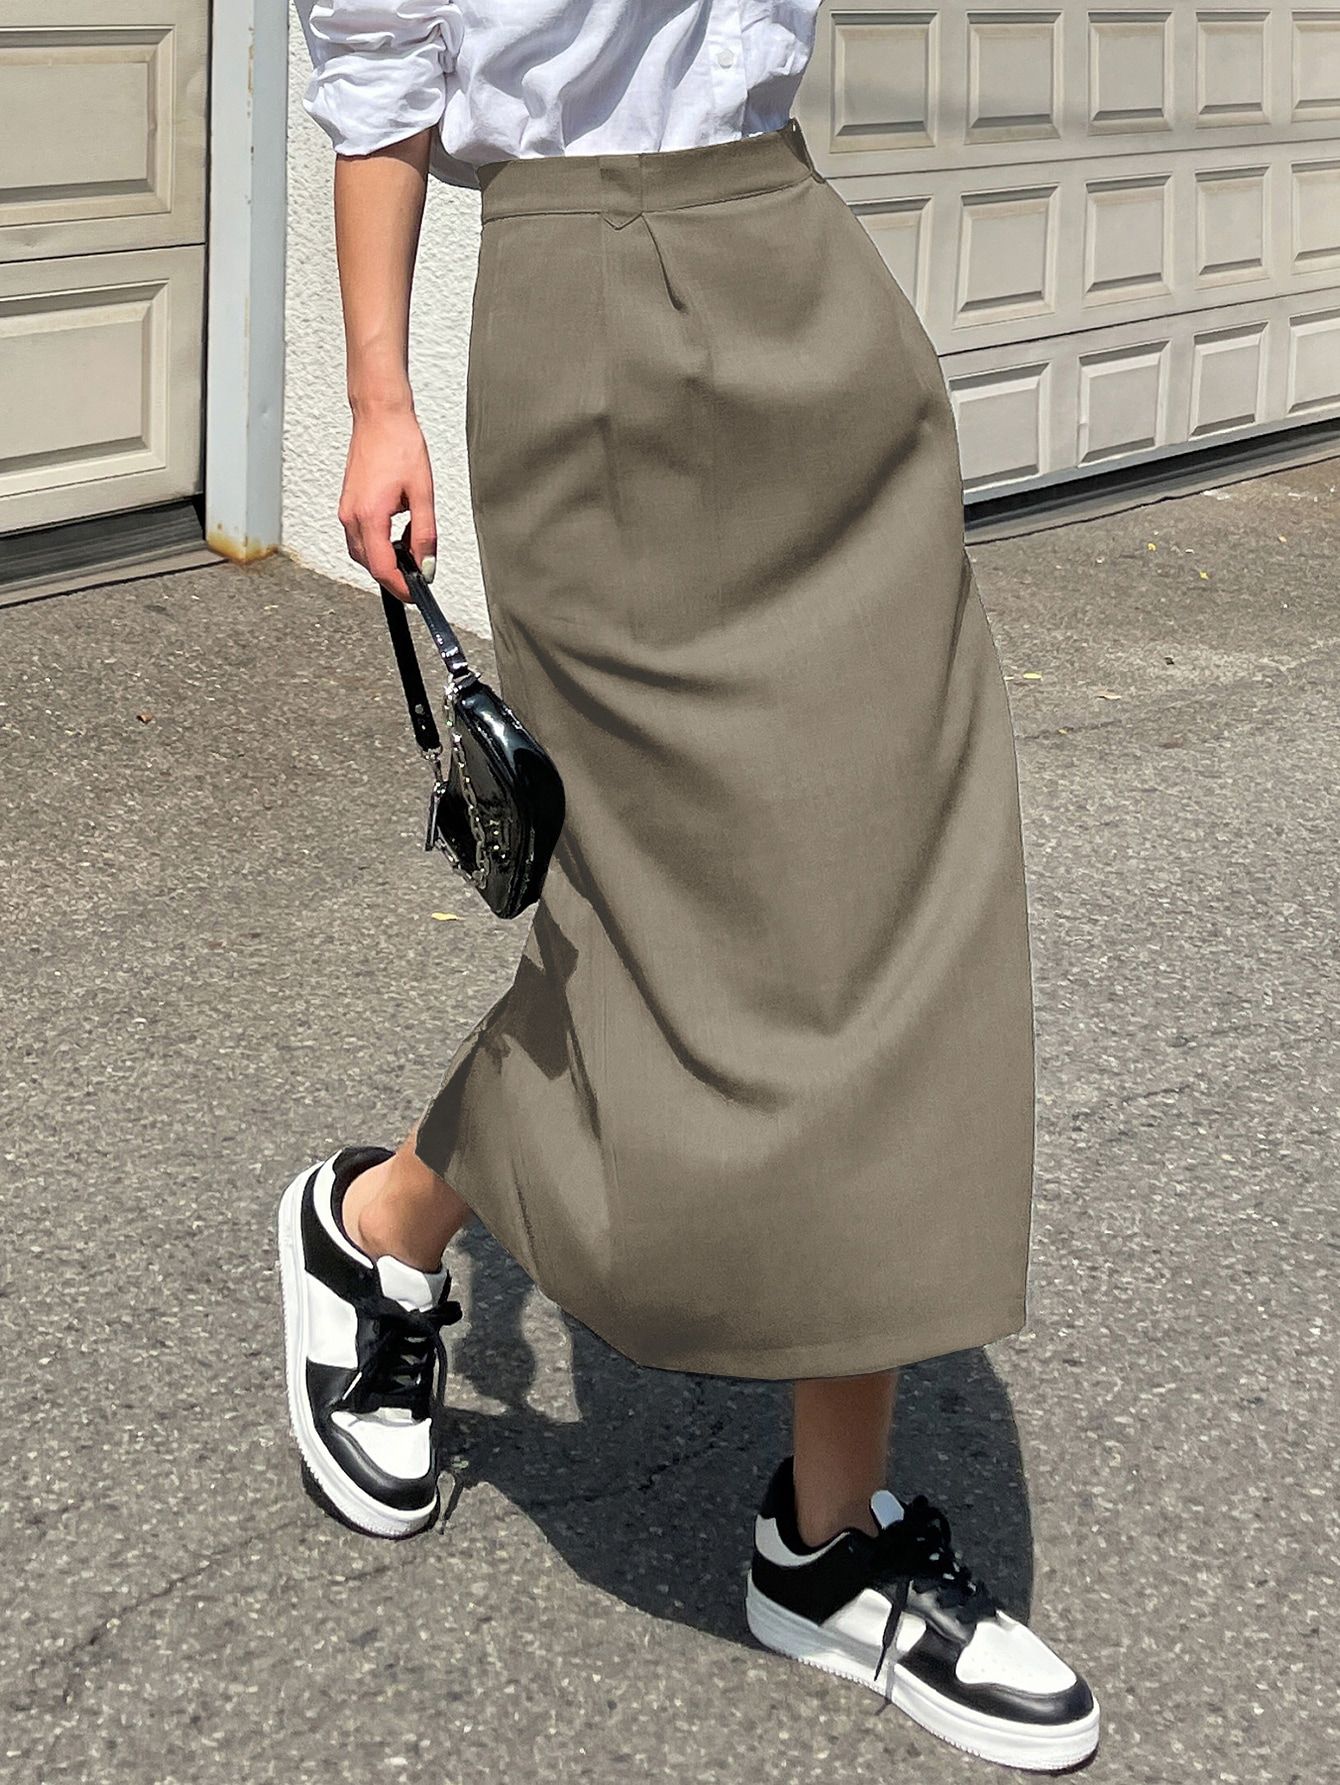 Effortless Elegance: Straight Skirts for Every Occasion